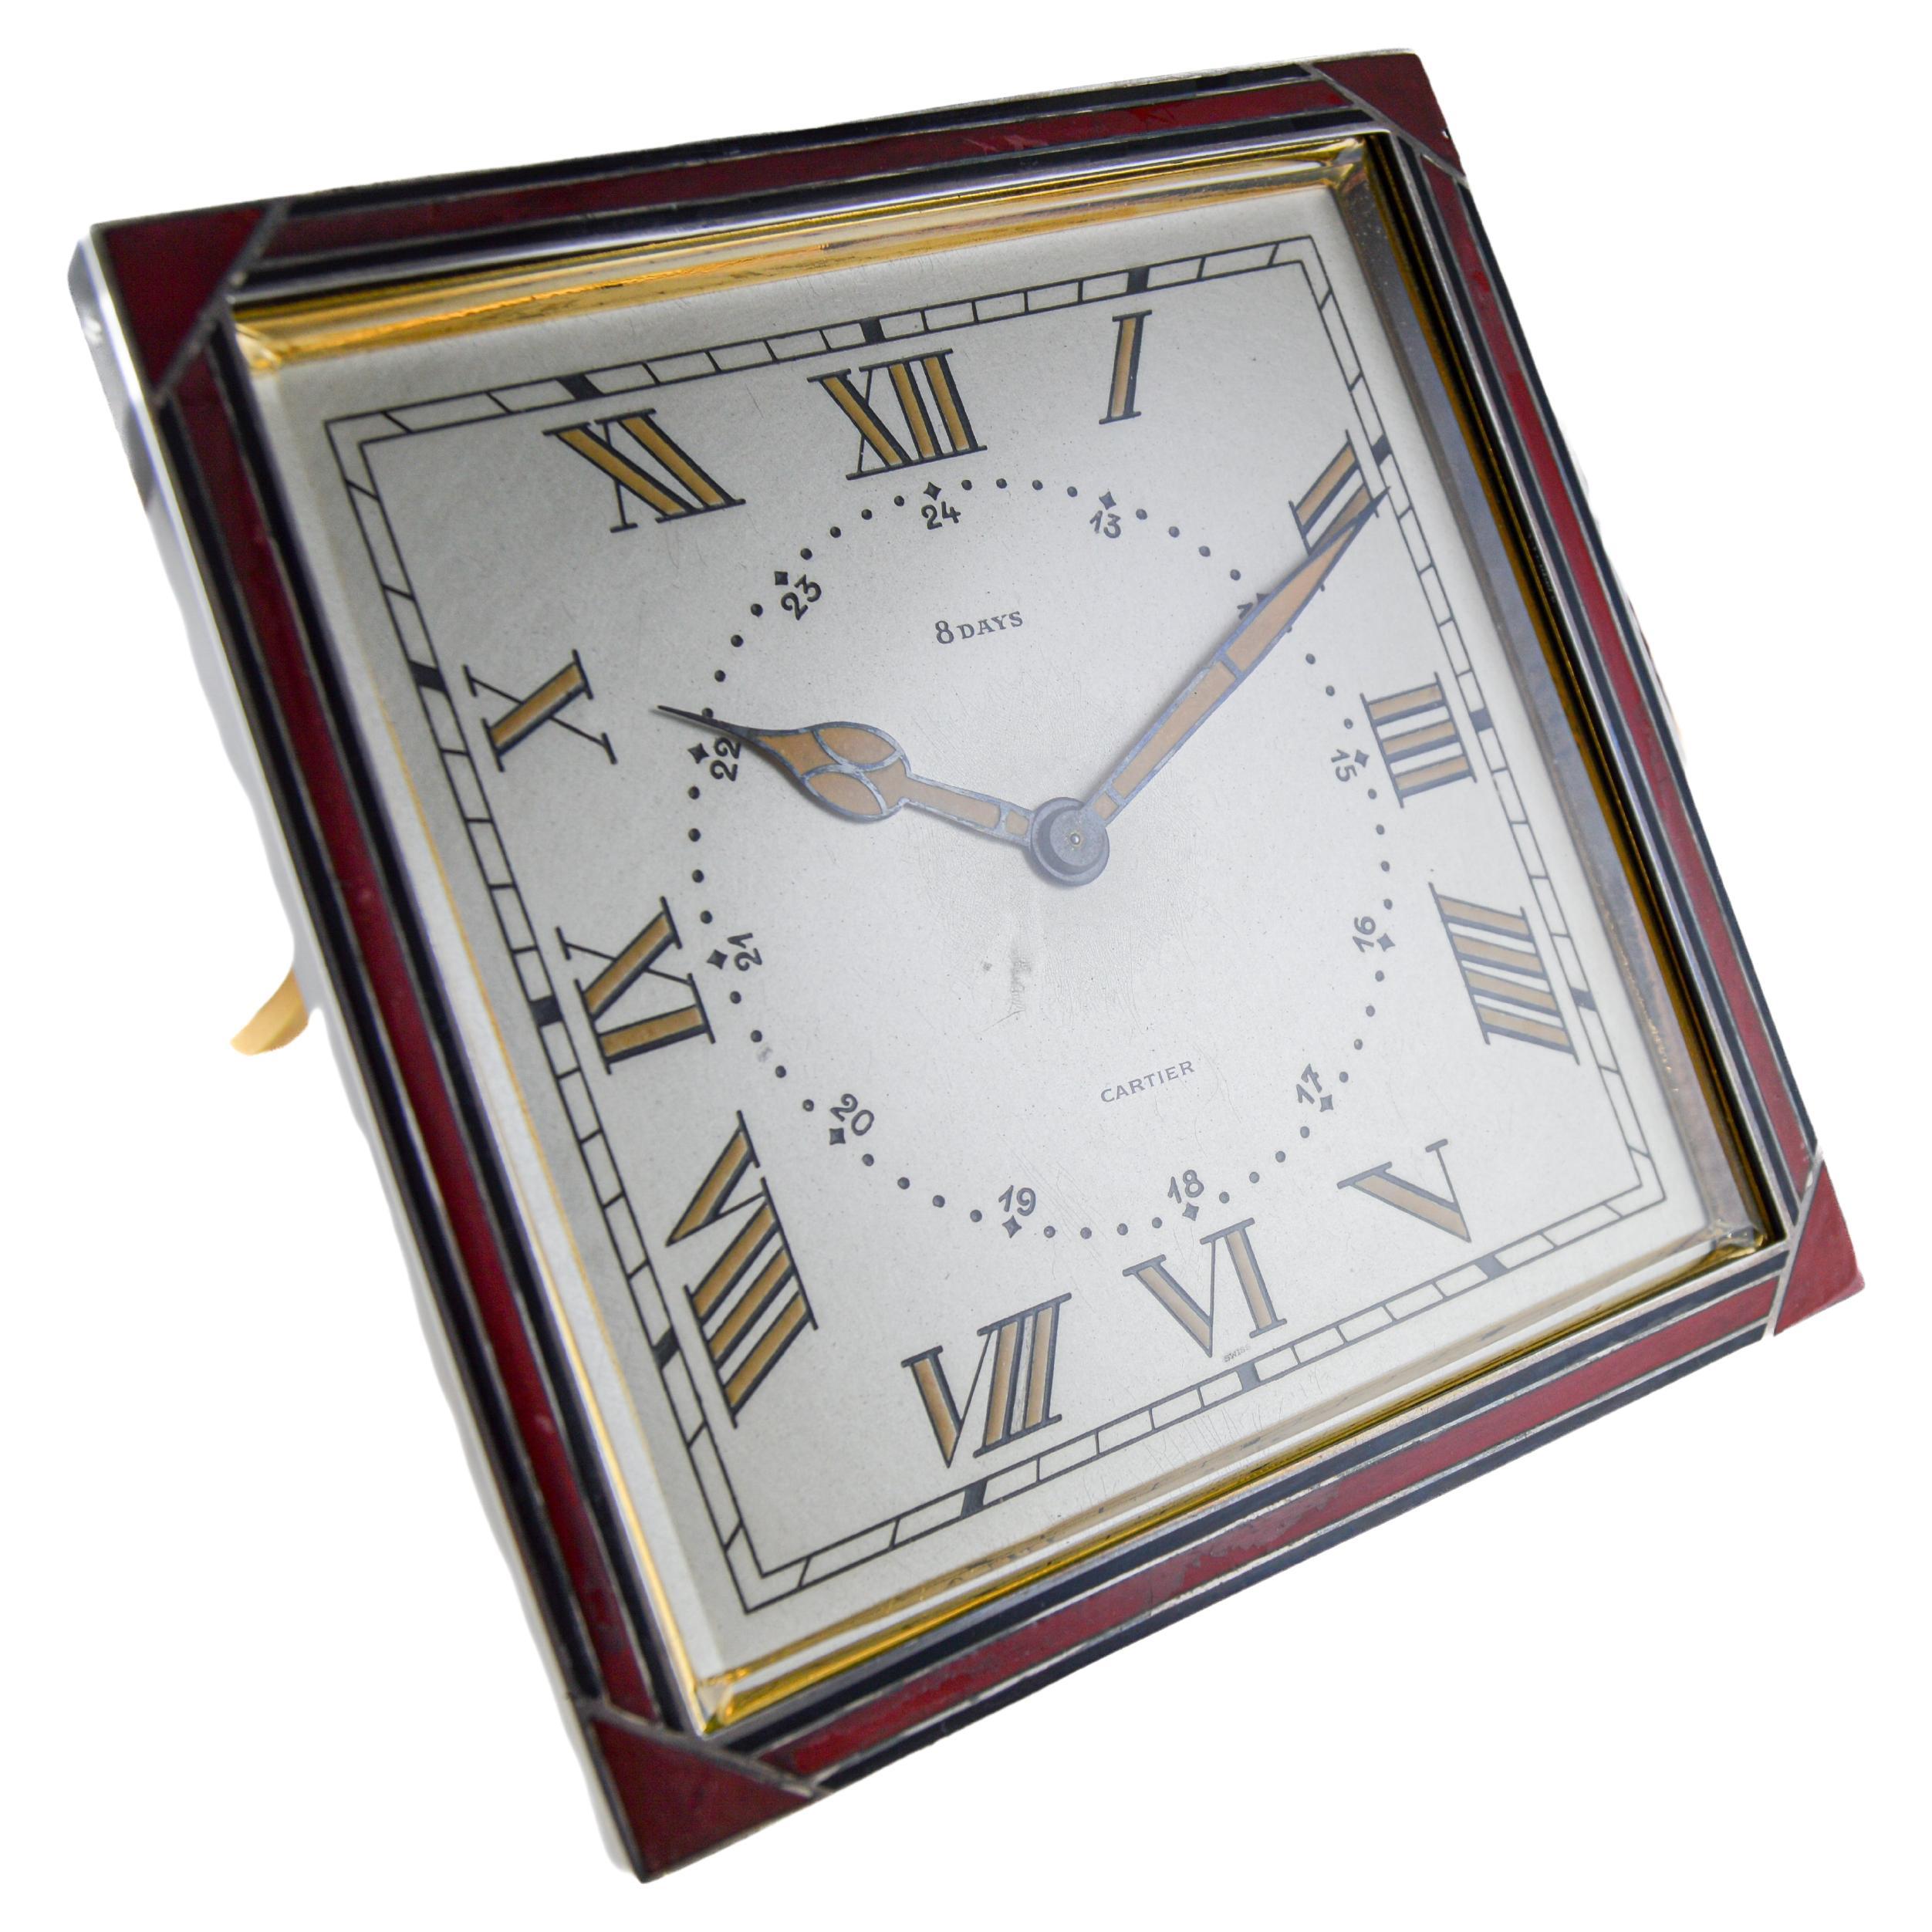 Cartier Sterling and Enamel Art Deco Desk Clock with Breguet Engine Turned Dial For Sale 2